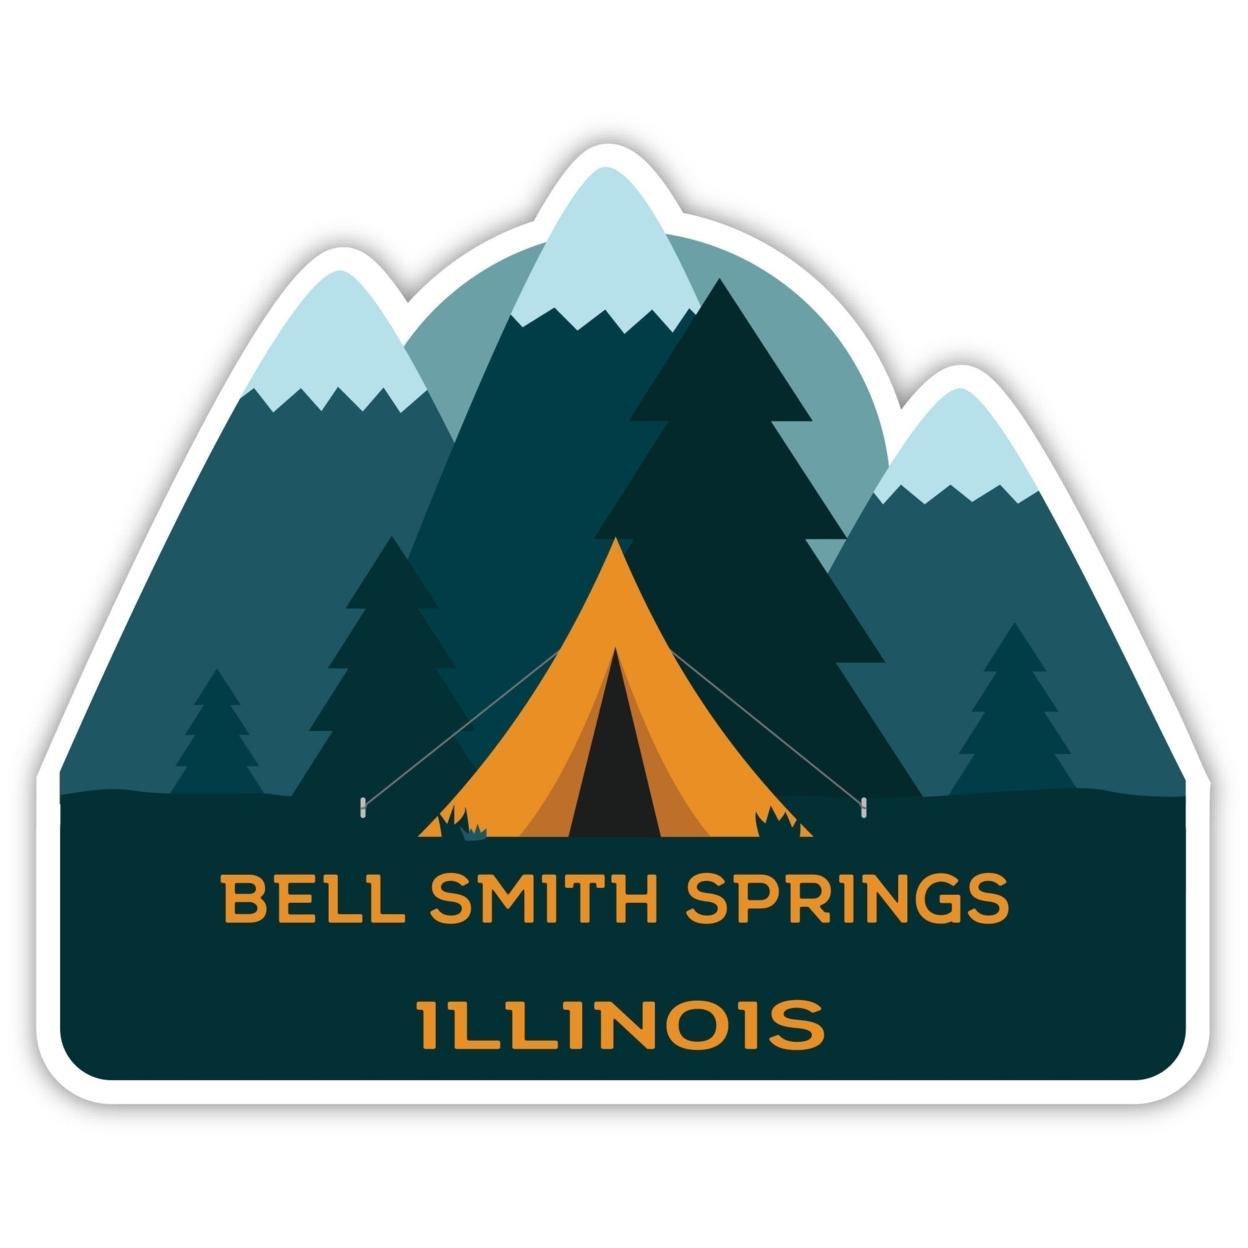 Bell Smith Springs Illinois Souvenir Decorative Stickers (Choose Theme And Size) - Single Unit, 4-Inch, Tent